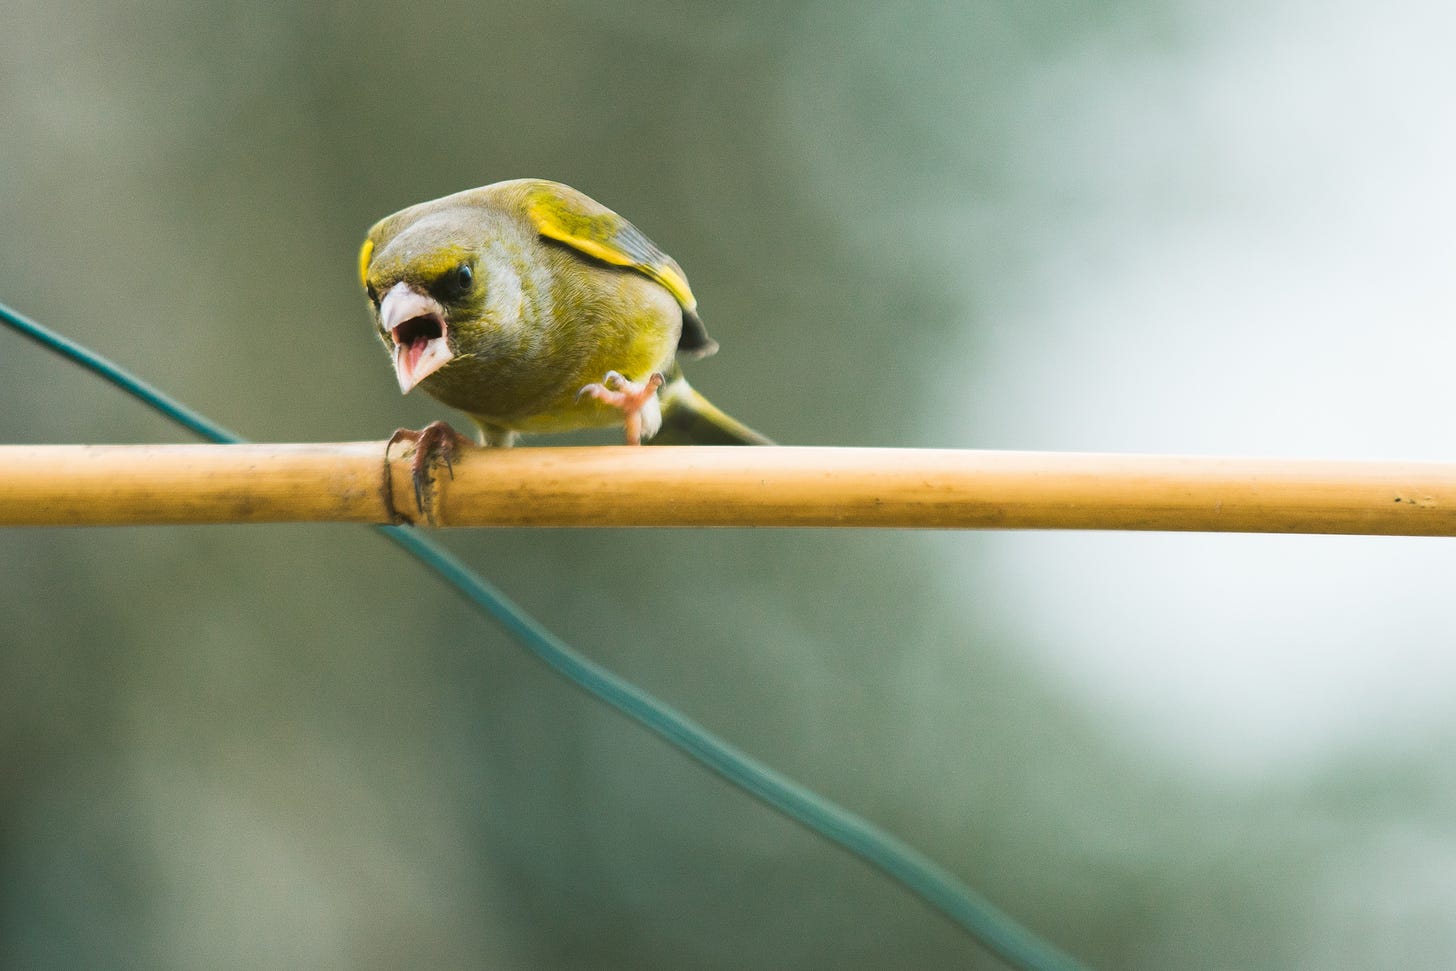 A yellow bird sits on a perch, leaning forward with its beak open, as if screaming.